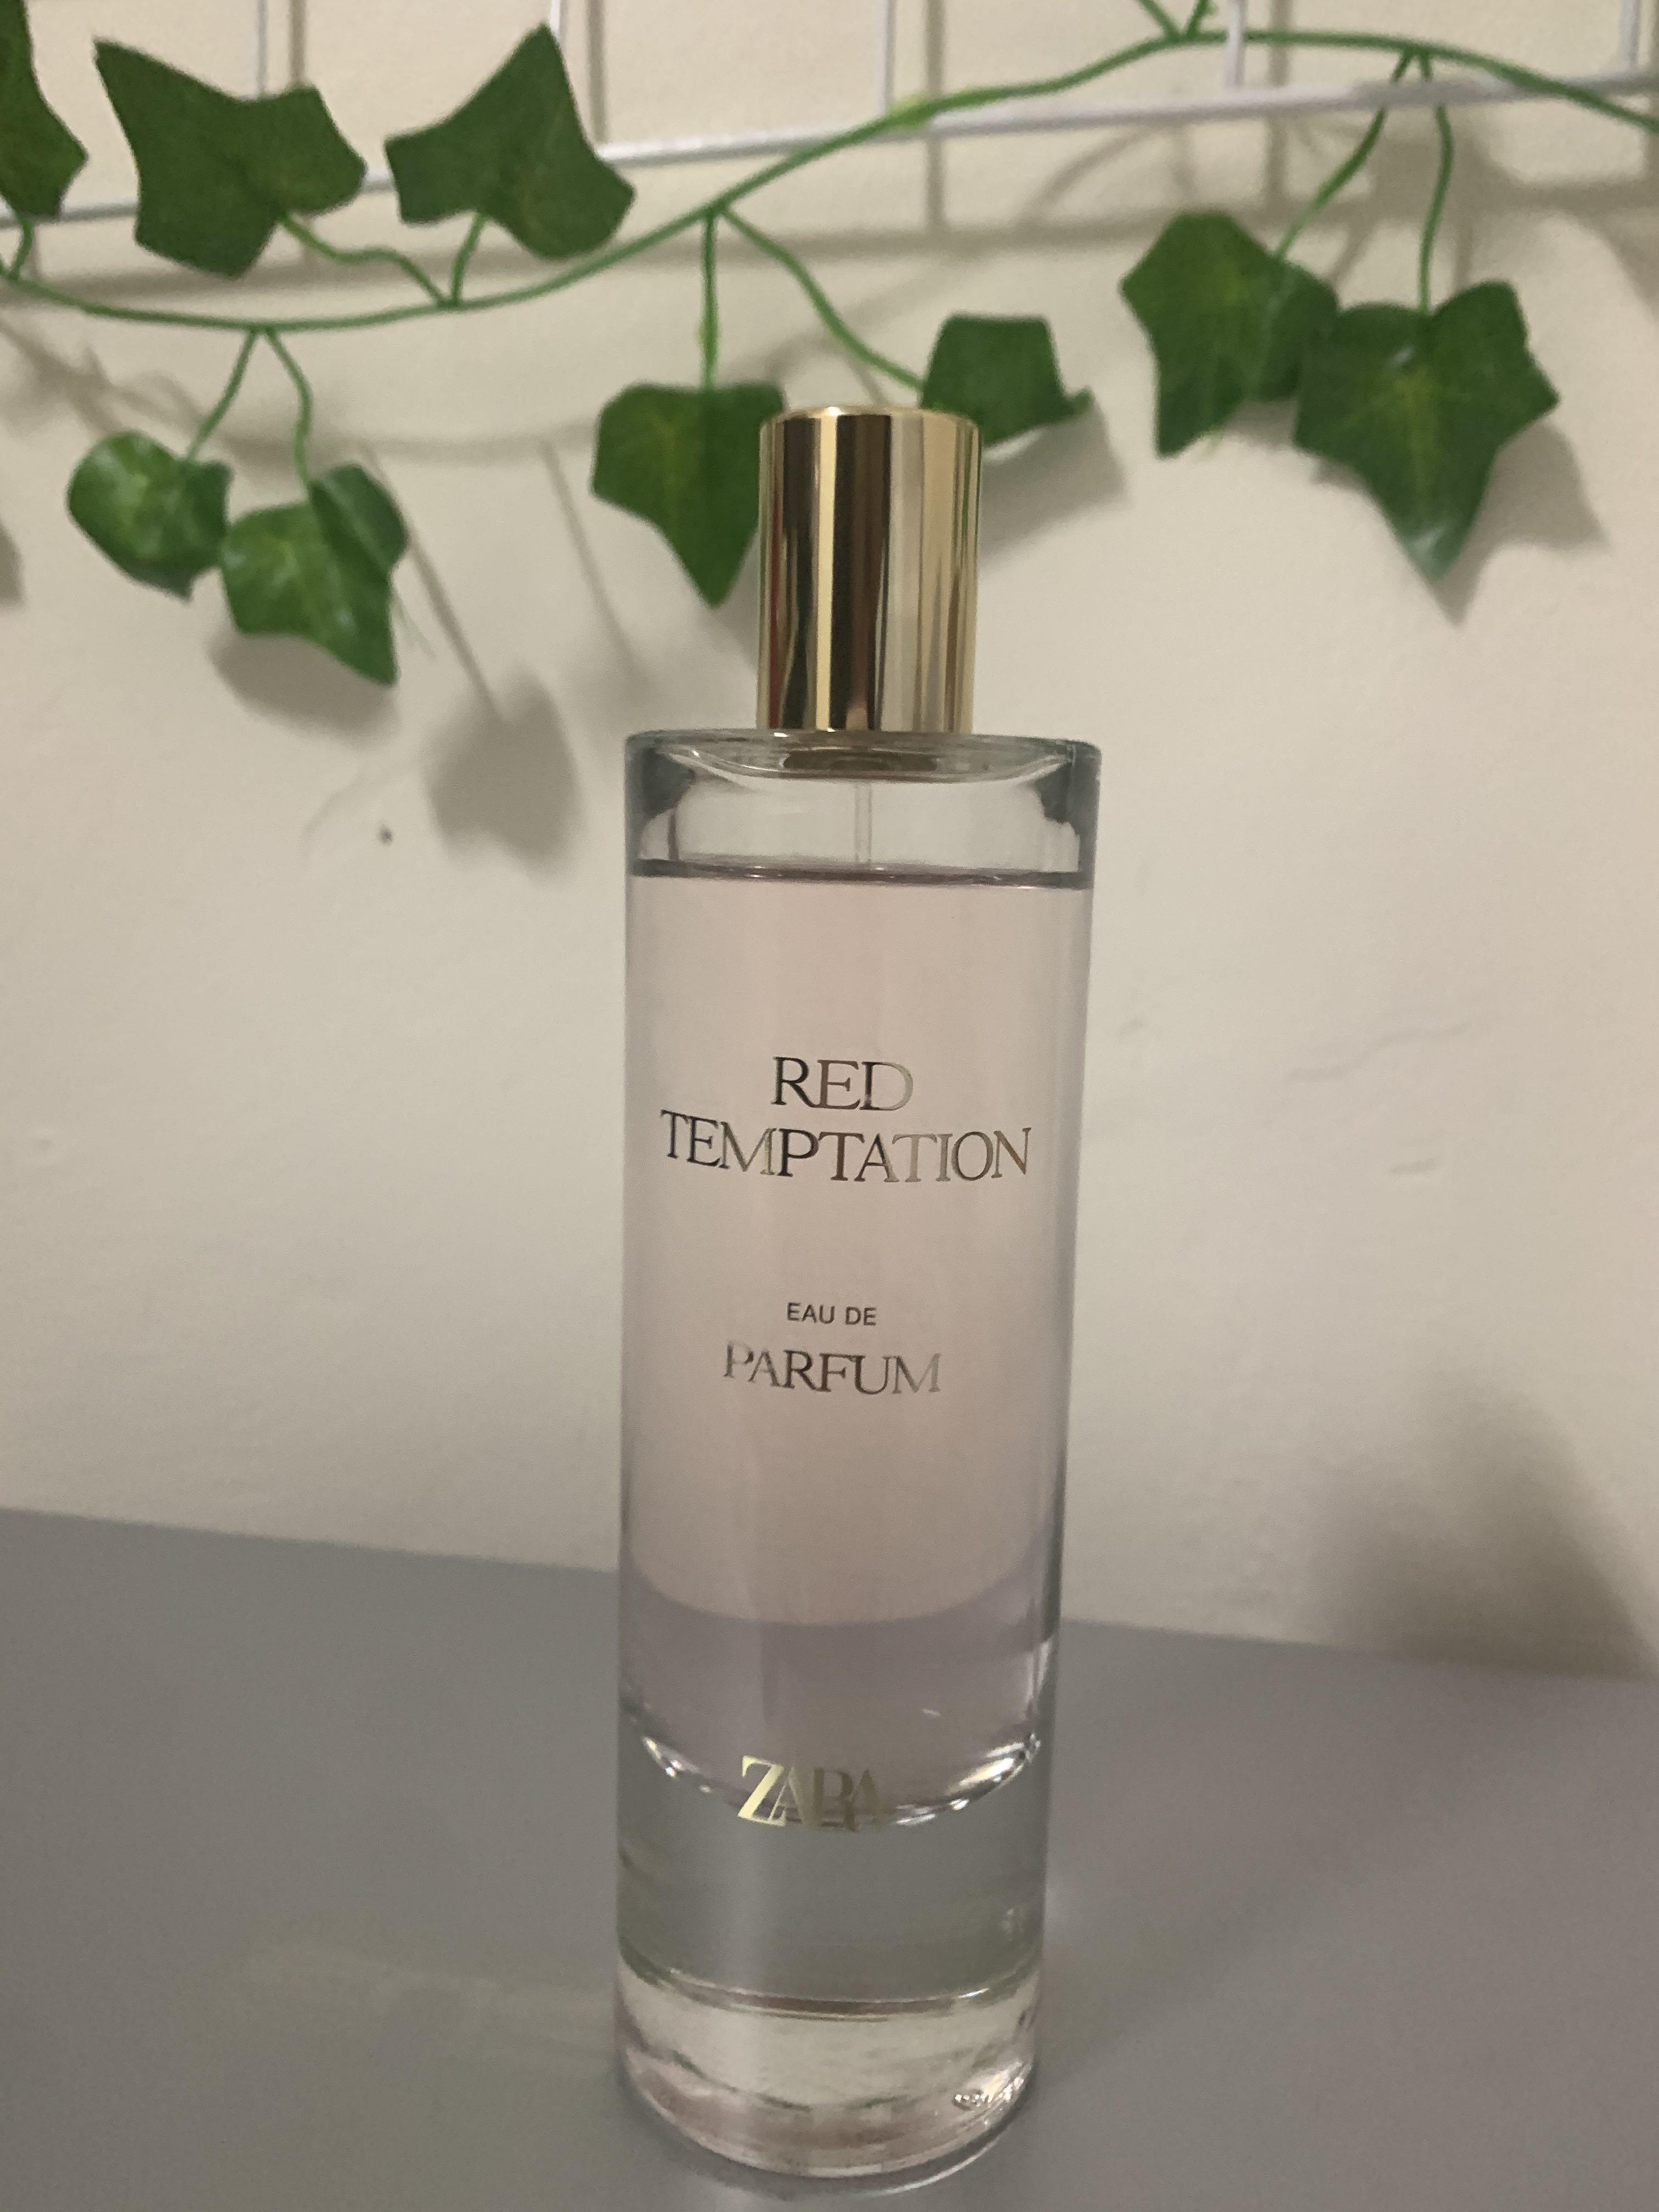 I'm a perfume expert and Zara has a dupe for pretty much every popular  scent - here's what I recommend